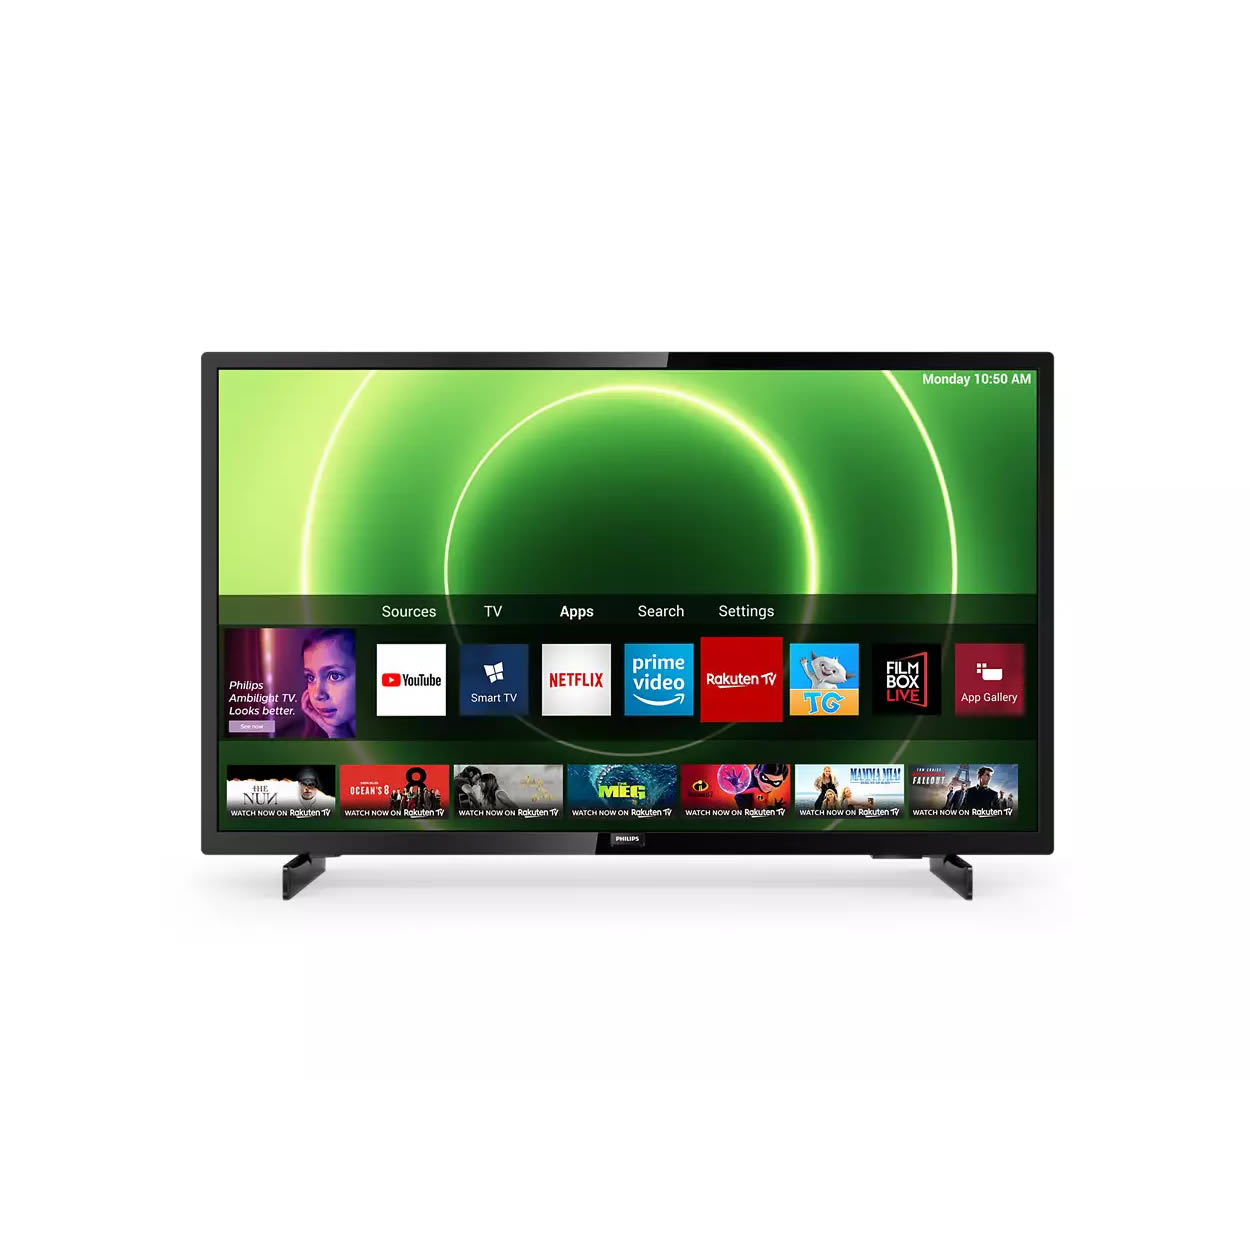 Philips 32inch LED SMART TV Full HD Freeview Wi-Fi